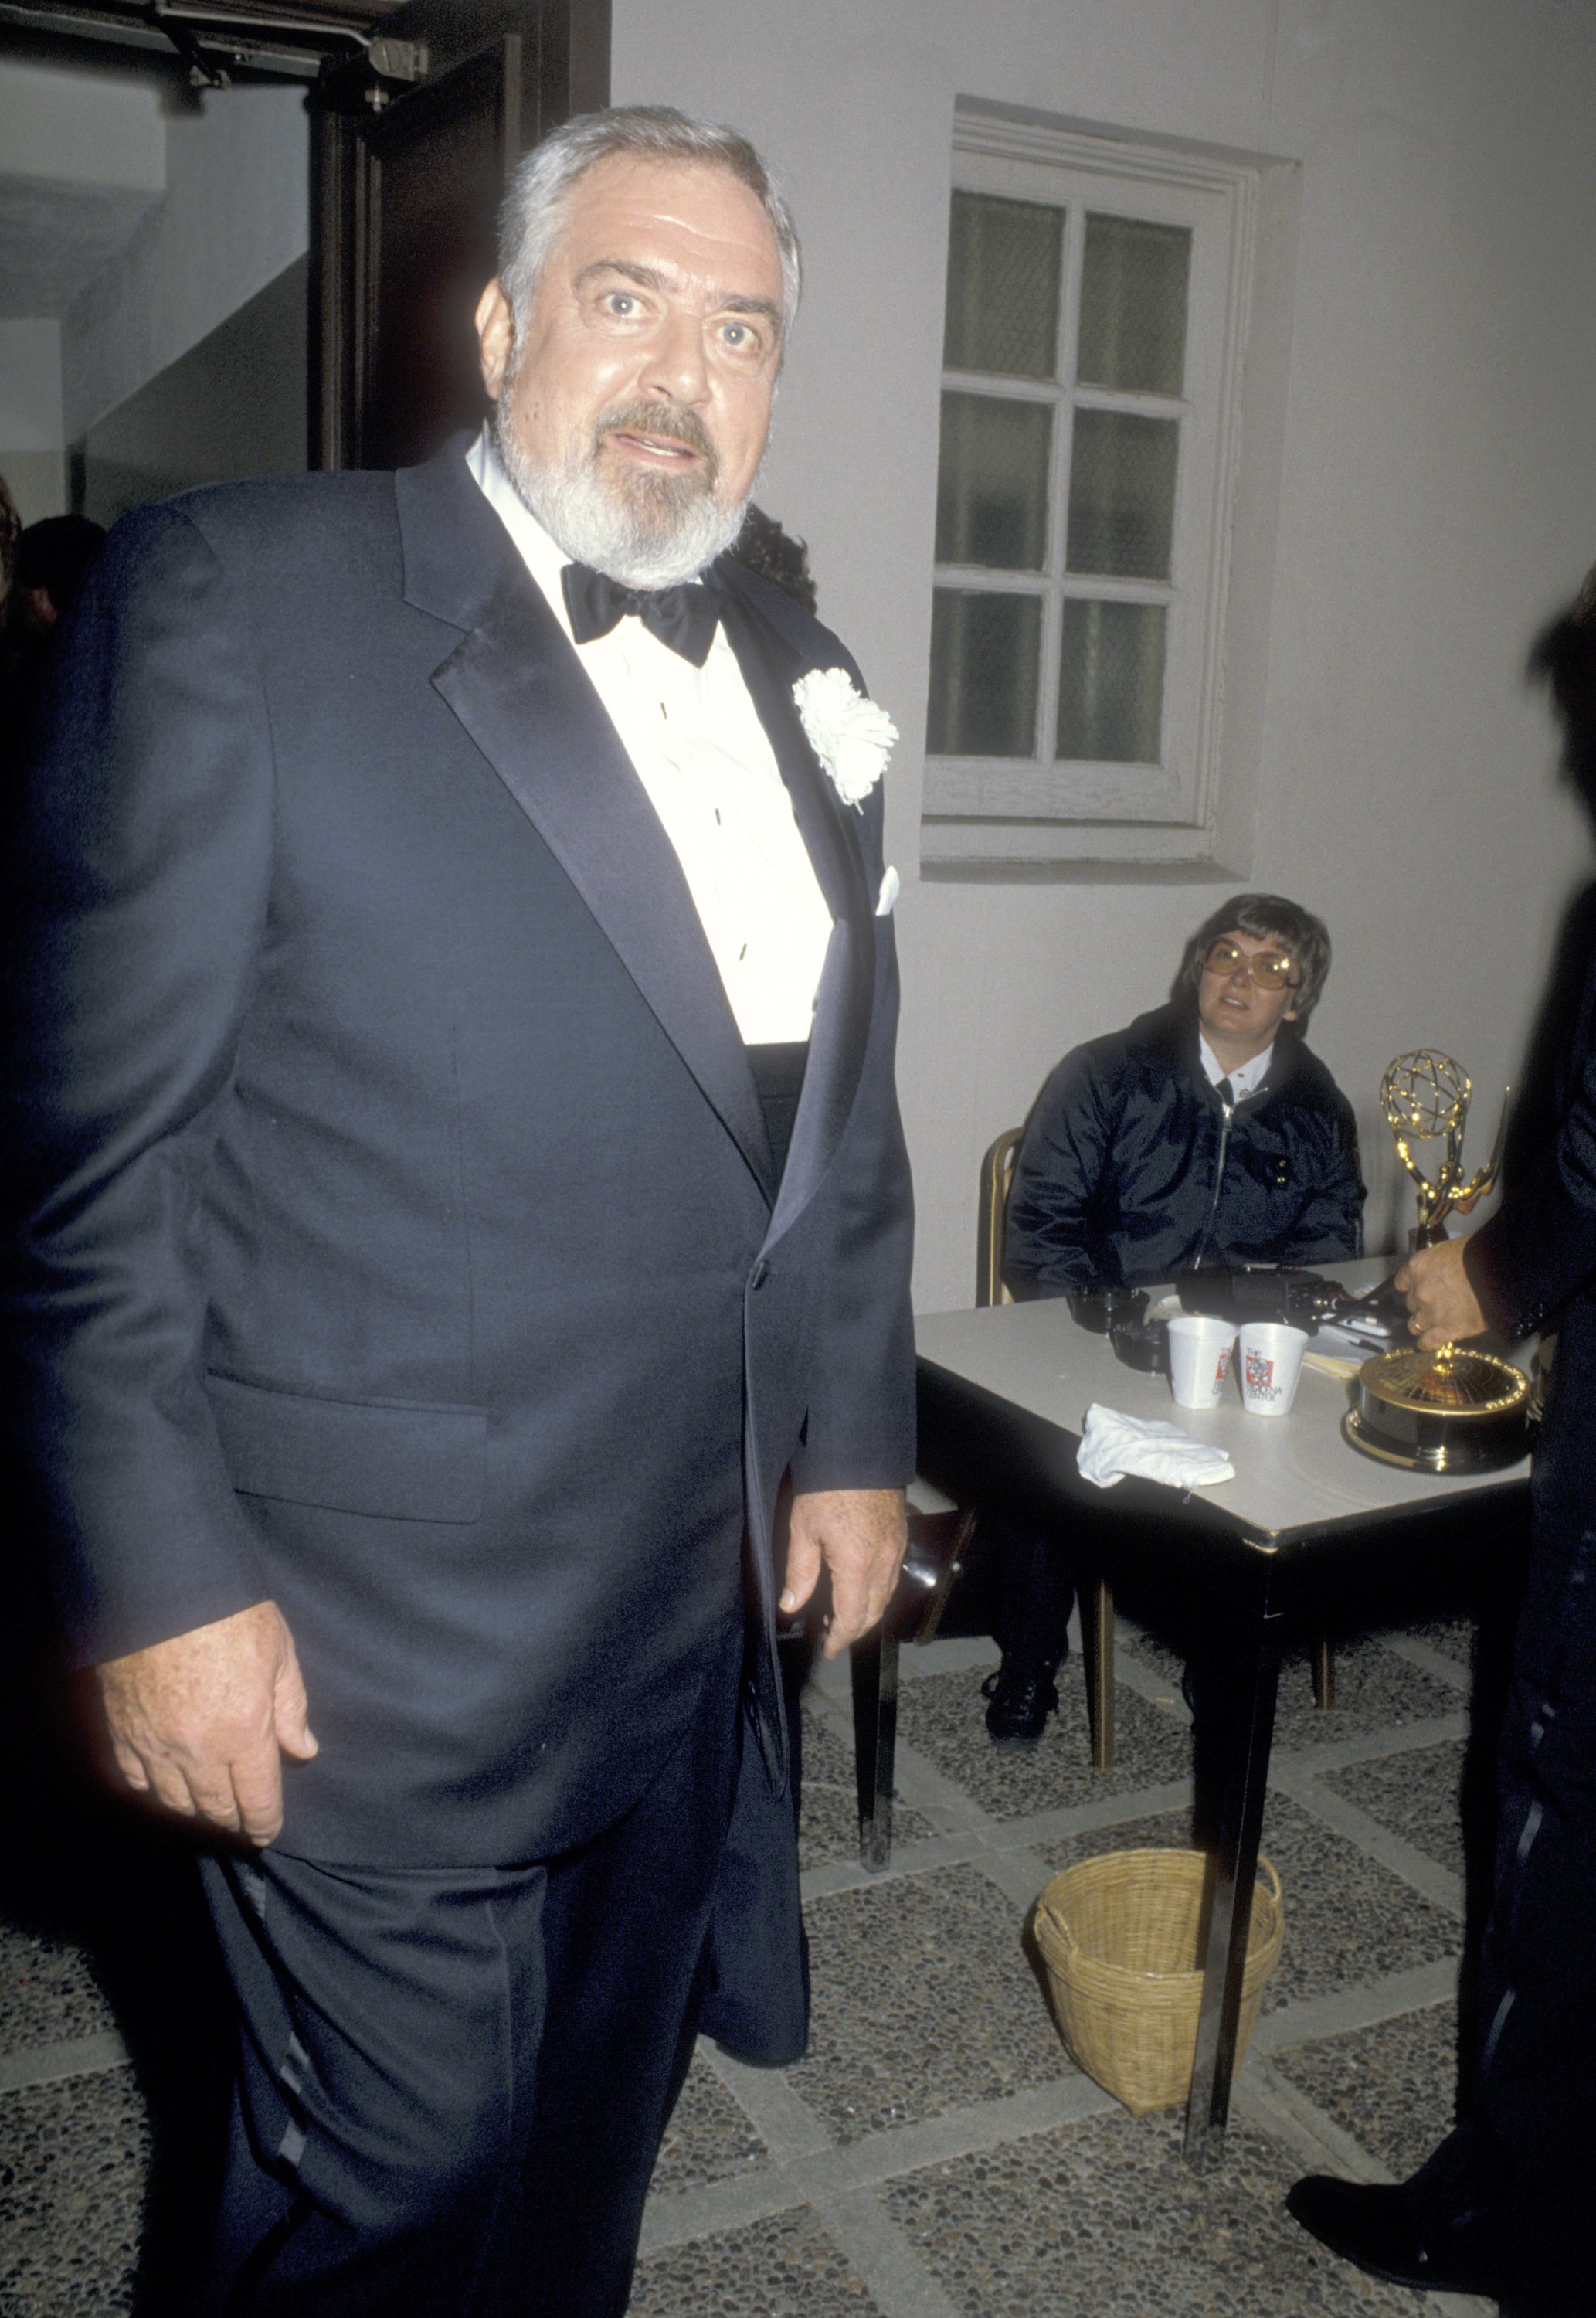 Actor Raymond Burr at the 38th Annual Primetime Emmy Awards on September 21, 1986 at Pasadena Civic Auditorium in Pasadena, California. | Source: Getty Images